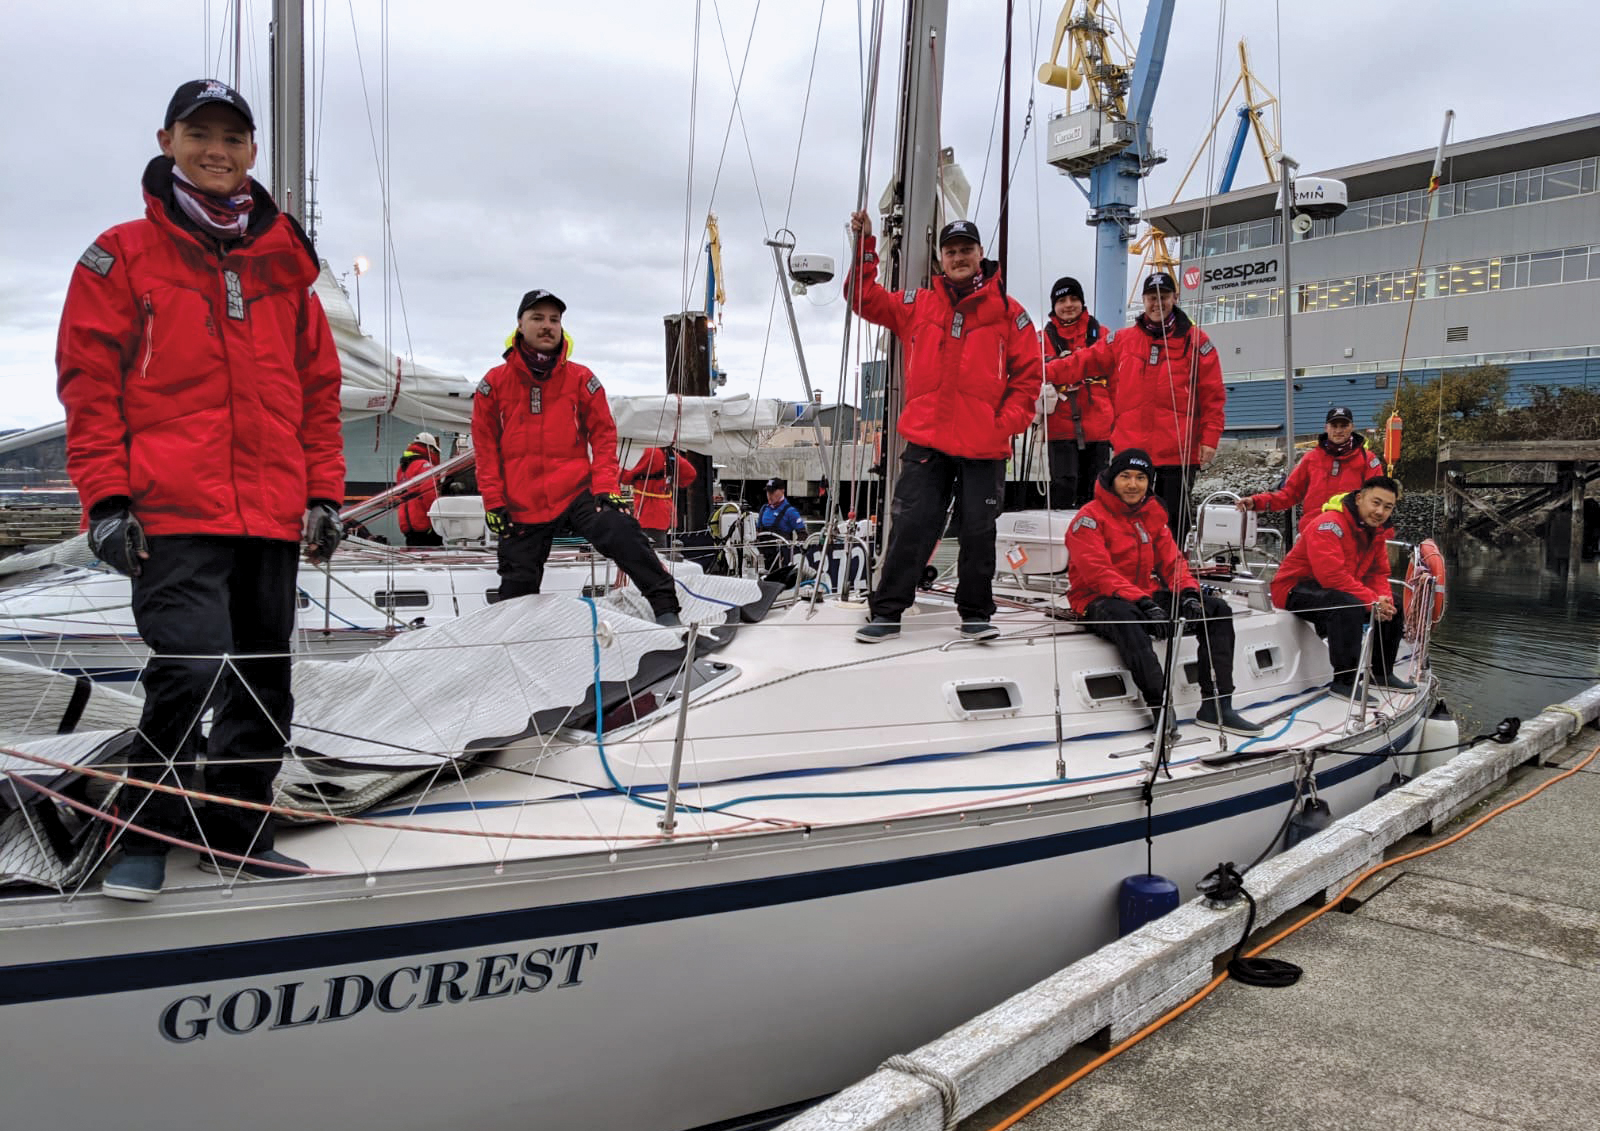 Another NFS(P) crew get set to sail in Sail Training Vessel Goldcrest for the regatta.